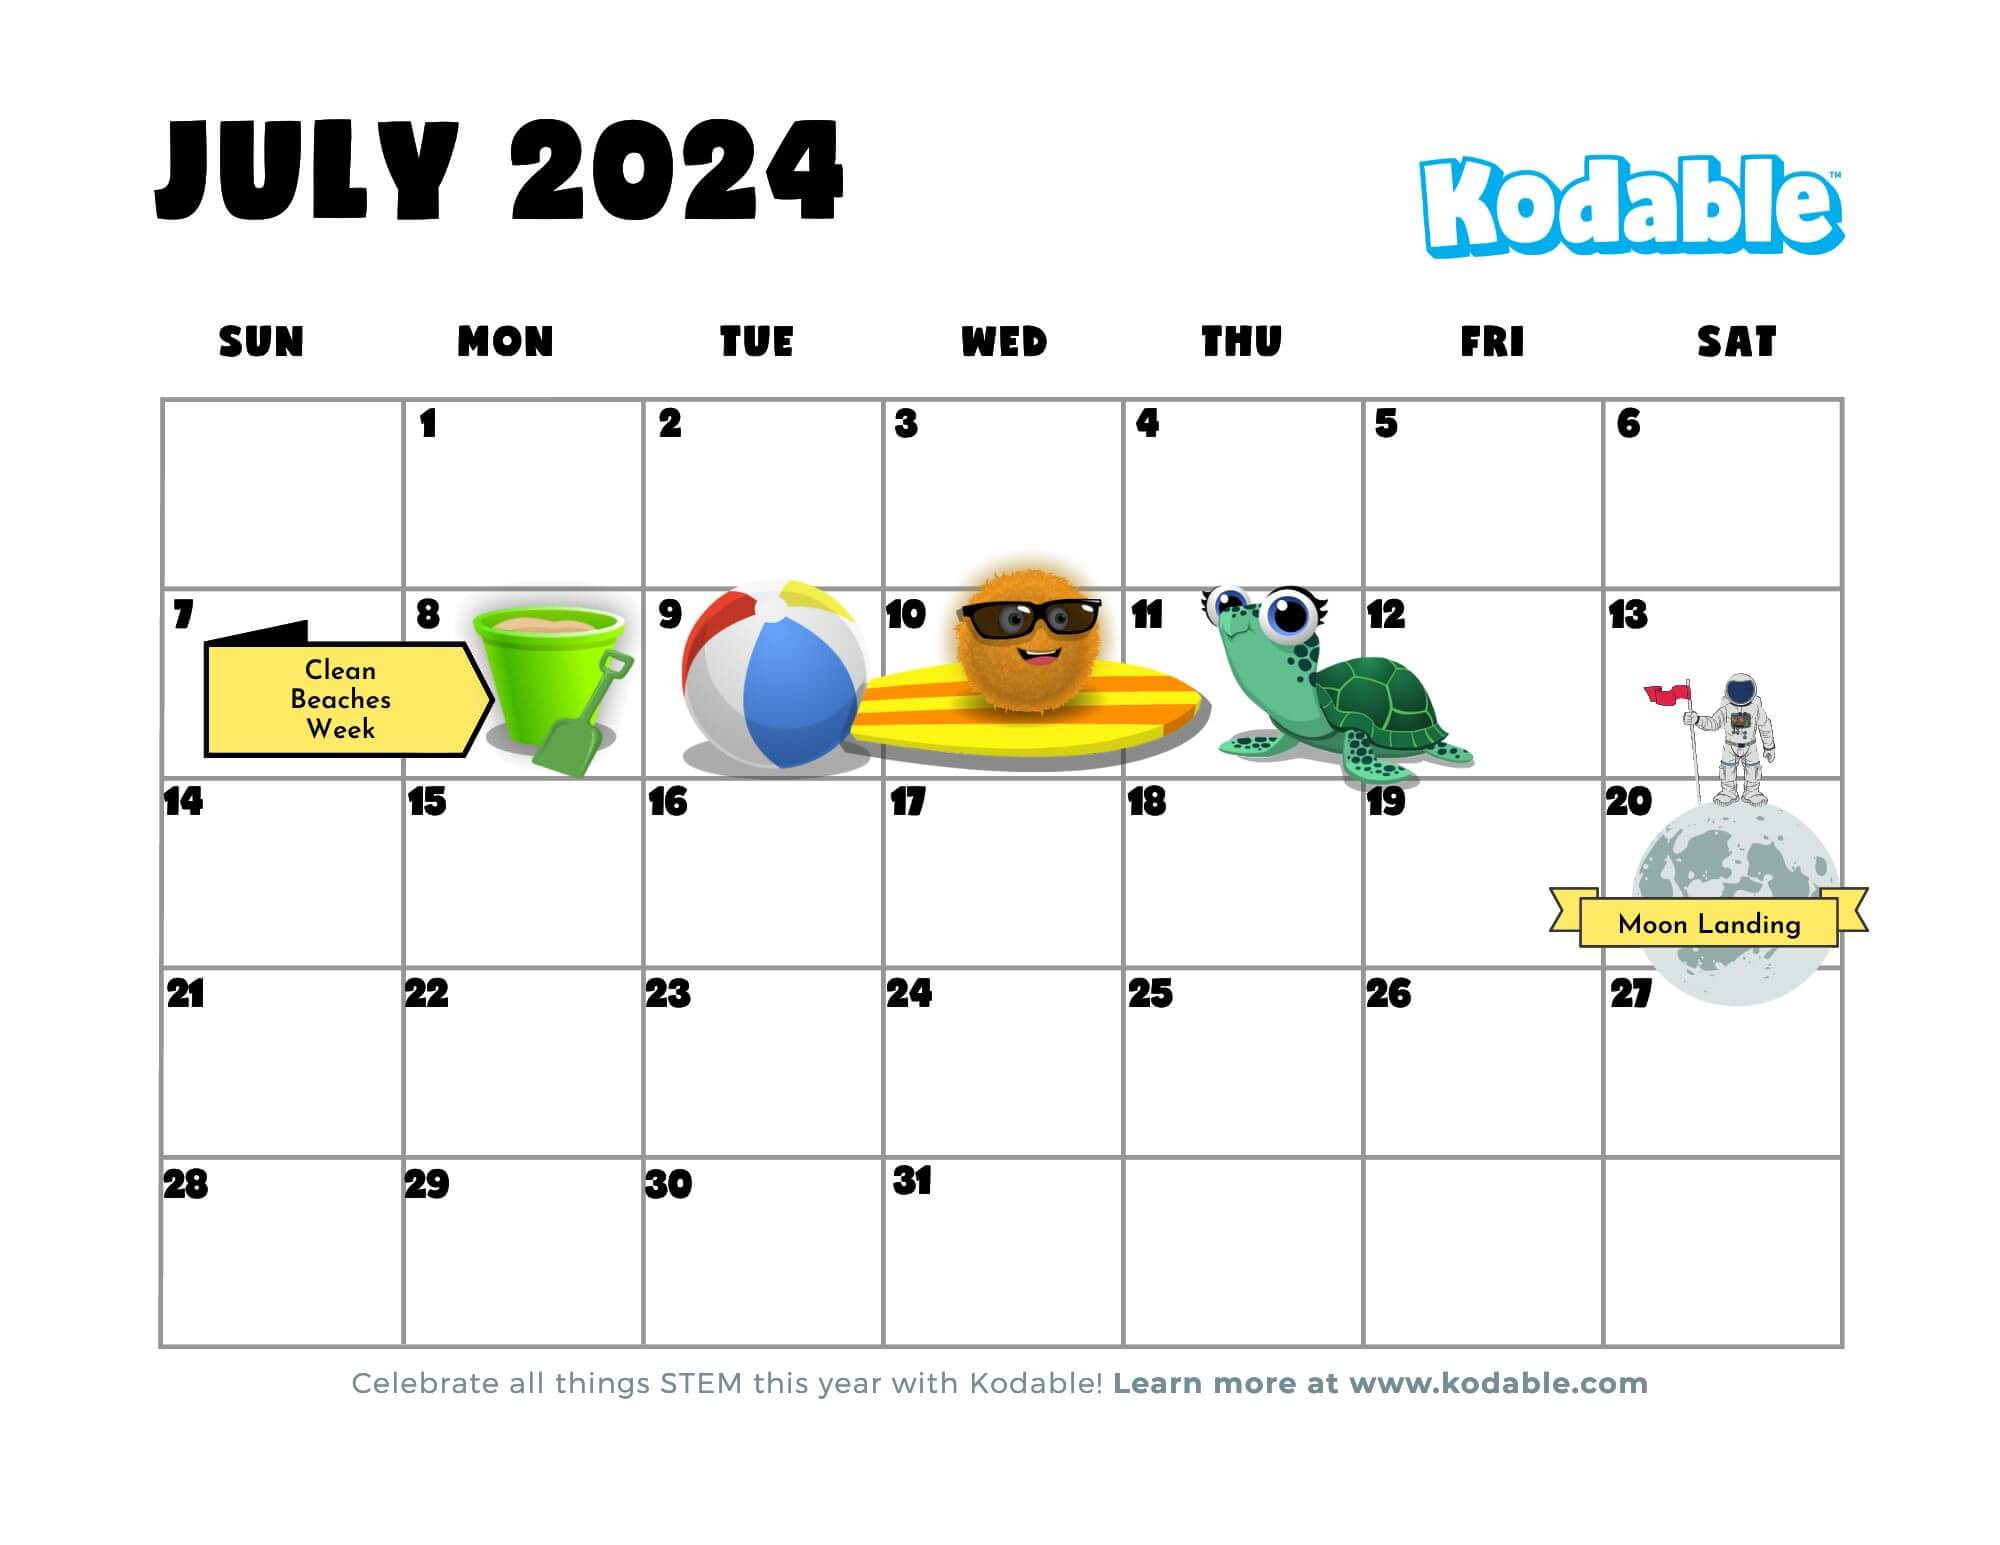 2023-2024 Stem Events Calendar And Holidays For Teachers | Kodable within July 2024 Calendar Events